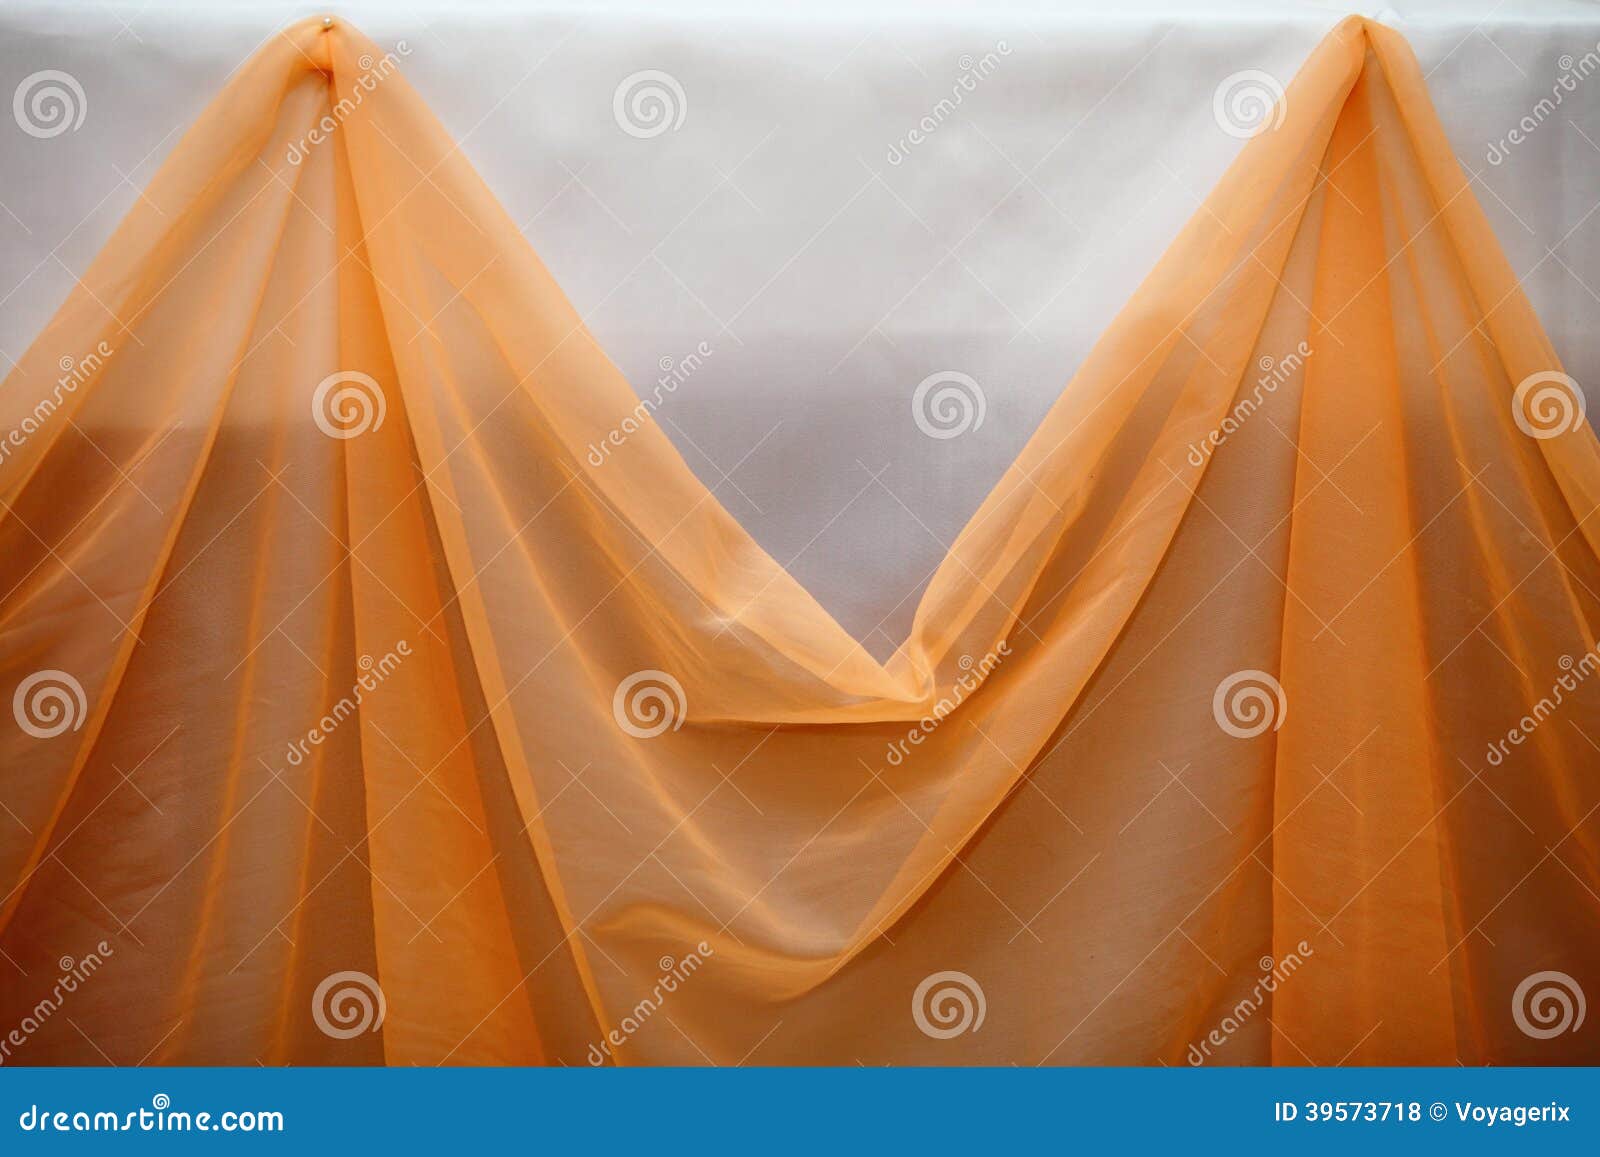 Orange Fabric Cloth and White Wall Decor Detail Stock Photo - Image of  clothing, color: 39573718